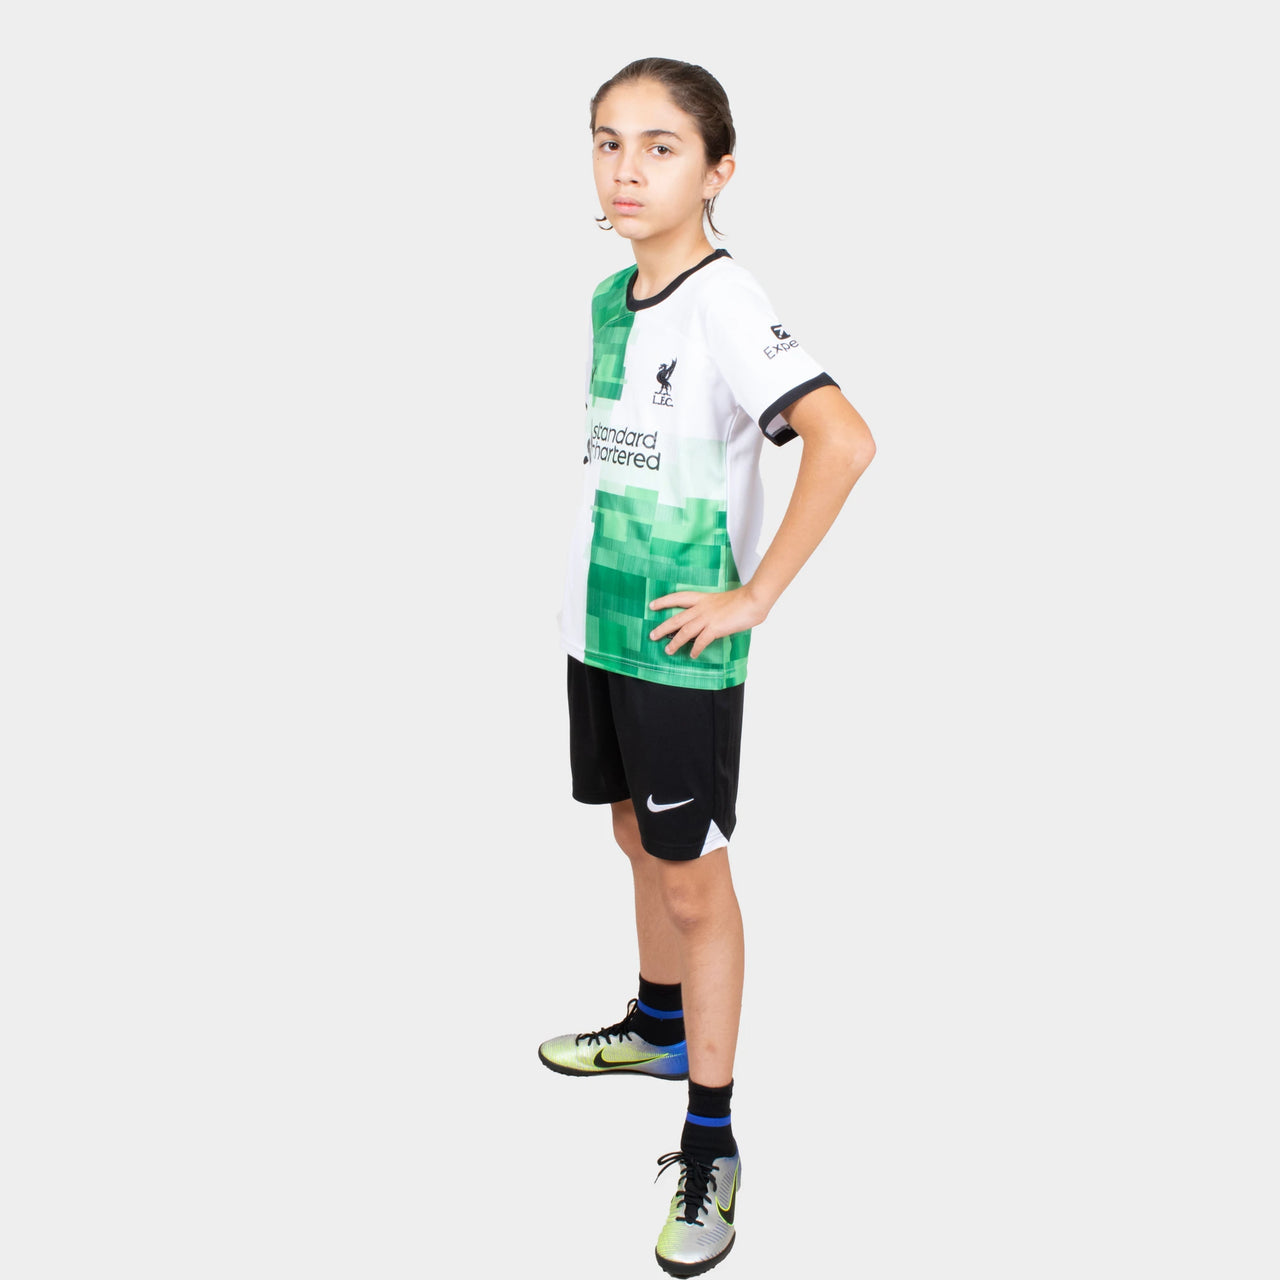 Liverpool Kids Kit Away Season 23/24 Designed By Mitani Store , Regular Fit Jersey Short Sleeves And Round Neck Collar In White And Green Patterns Color